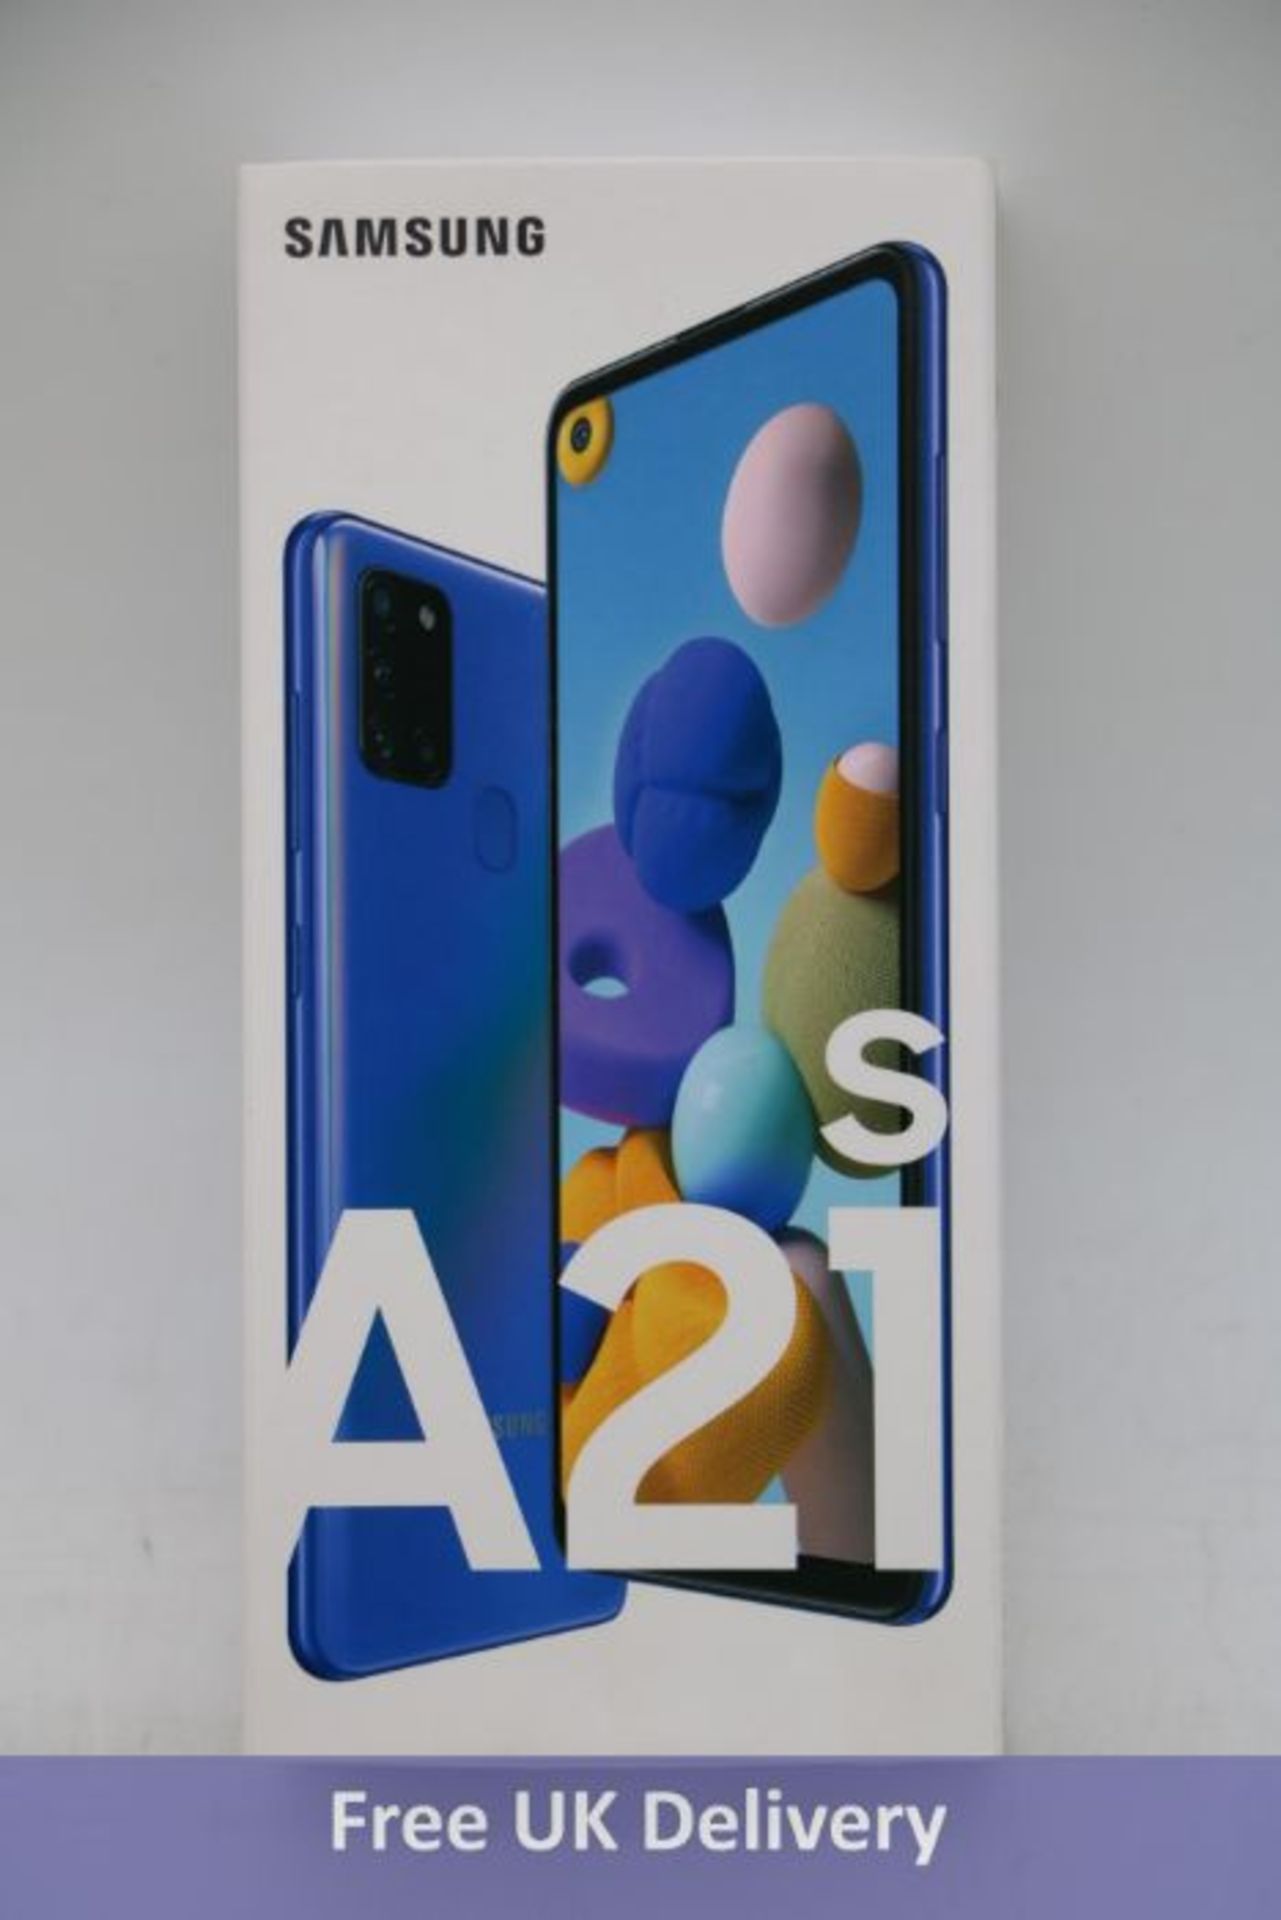 Ten Samsung Galaxy A21s Android Mobile Phones, 64GB, Blue. Brand New, Sealed